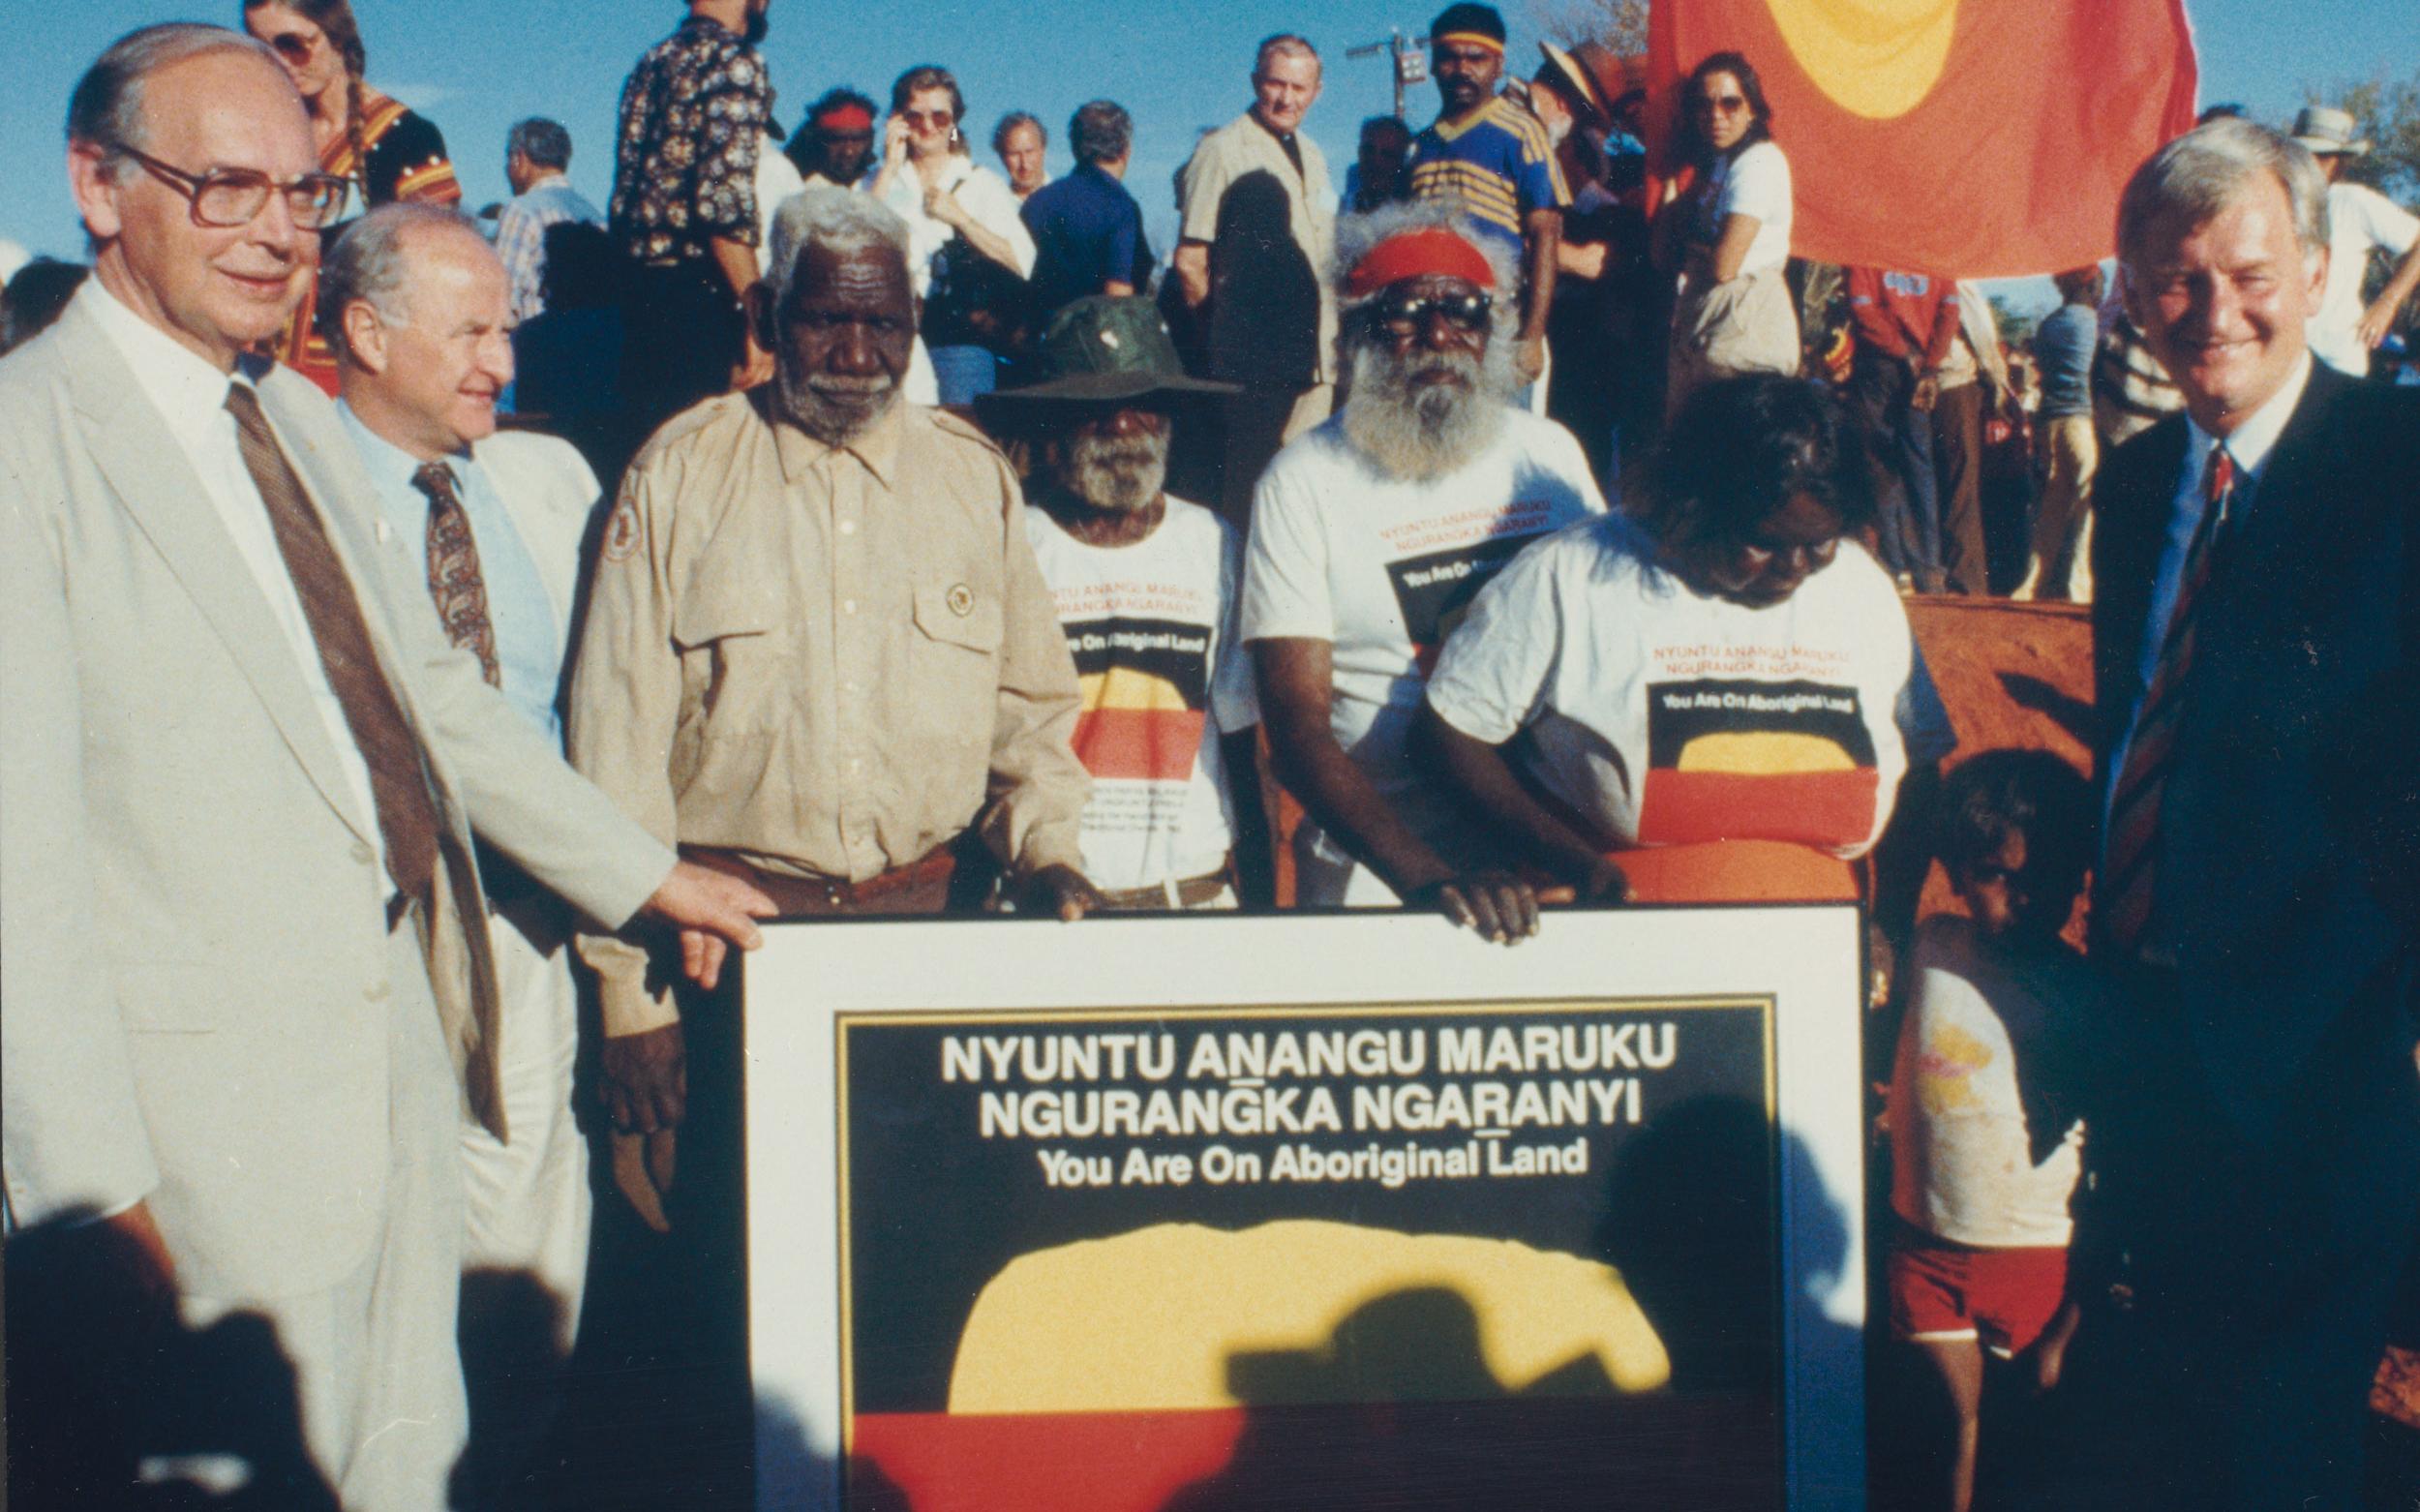 Traditional owners Mr Peter Bulla, Mr Peter Kanari, Mr Nipper Winmarti and his wife, Barbara Tjirkadu with Sir Ninian Stephen, Mr Holding and Mr Cohen (extreme right) and the special poster marking the handback of the title to Uluru-Kata Tjuta National Park.